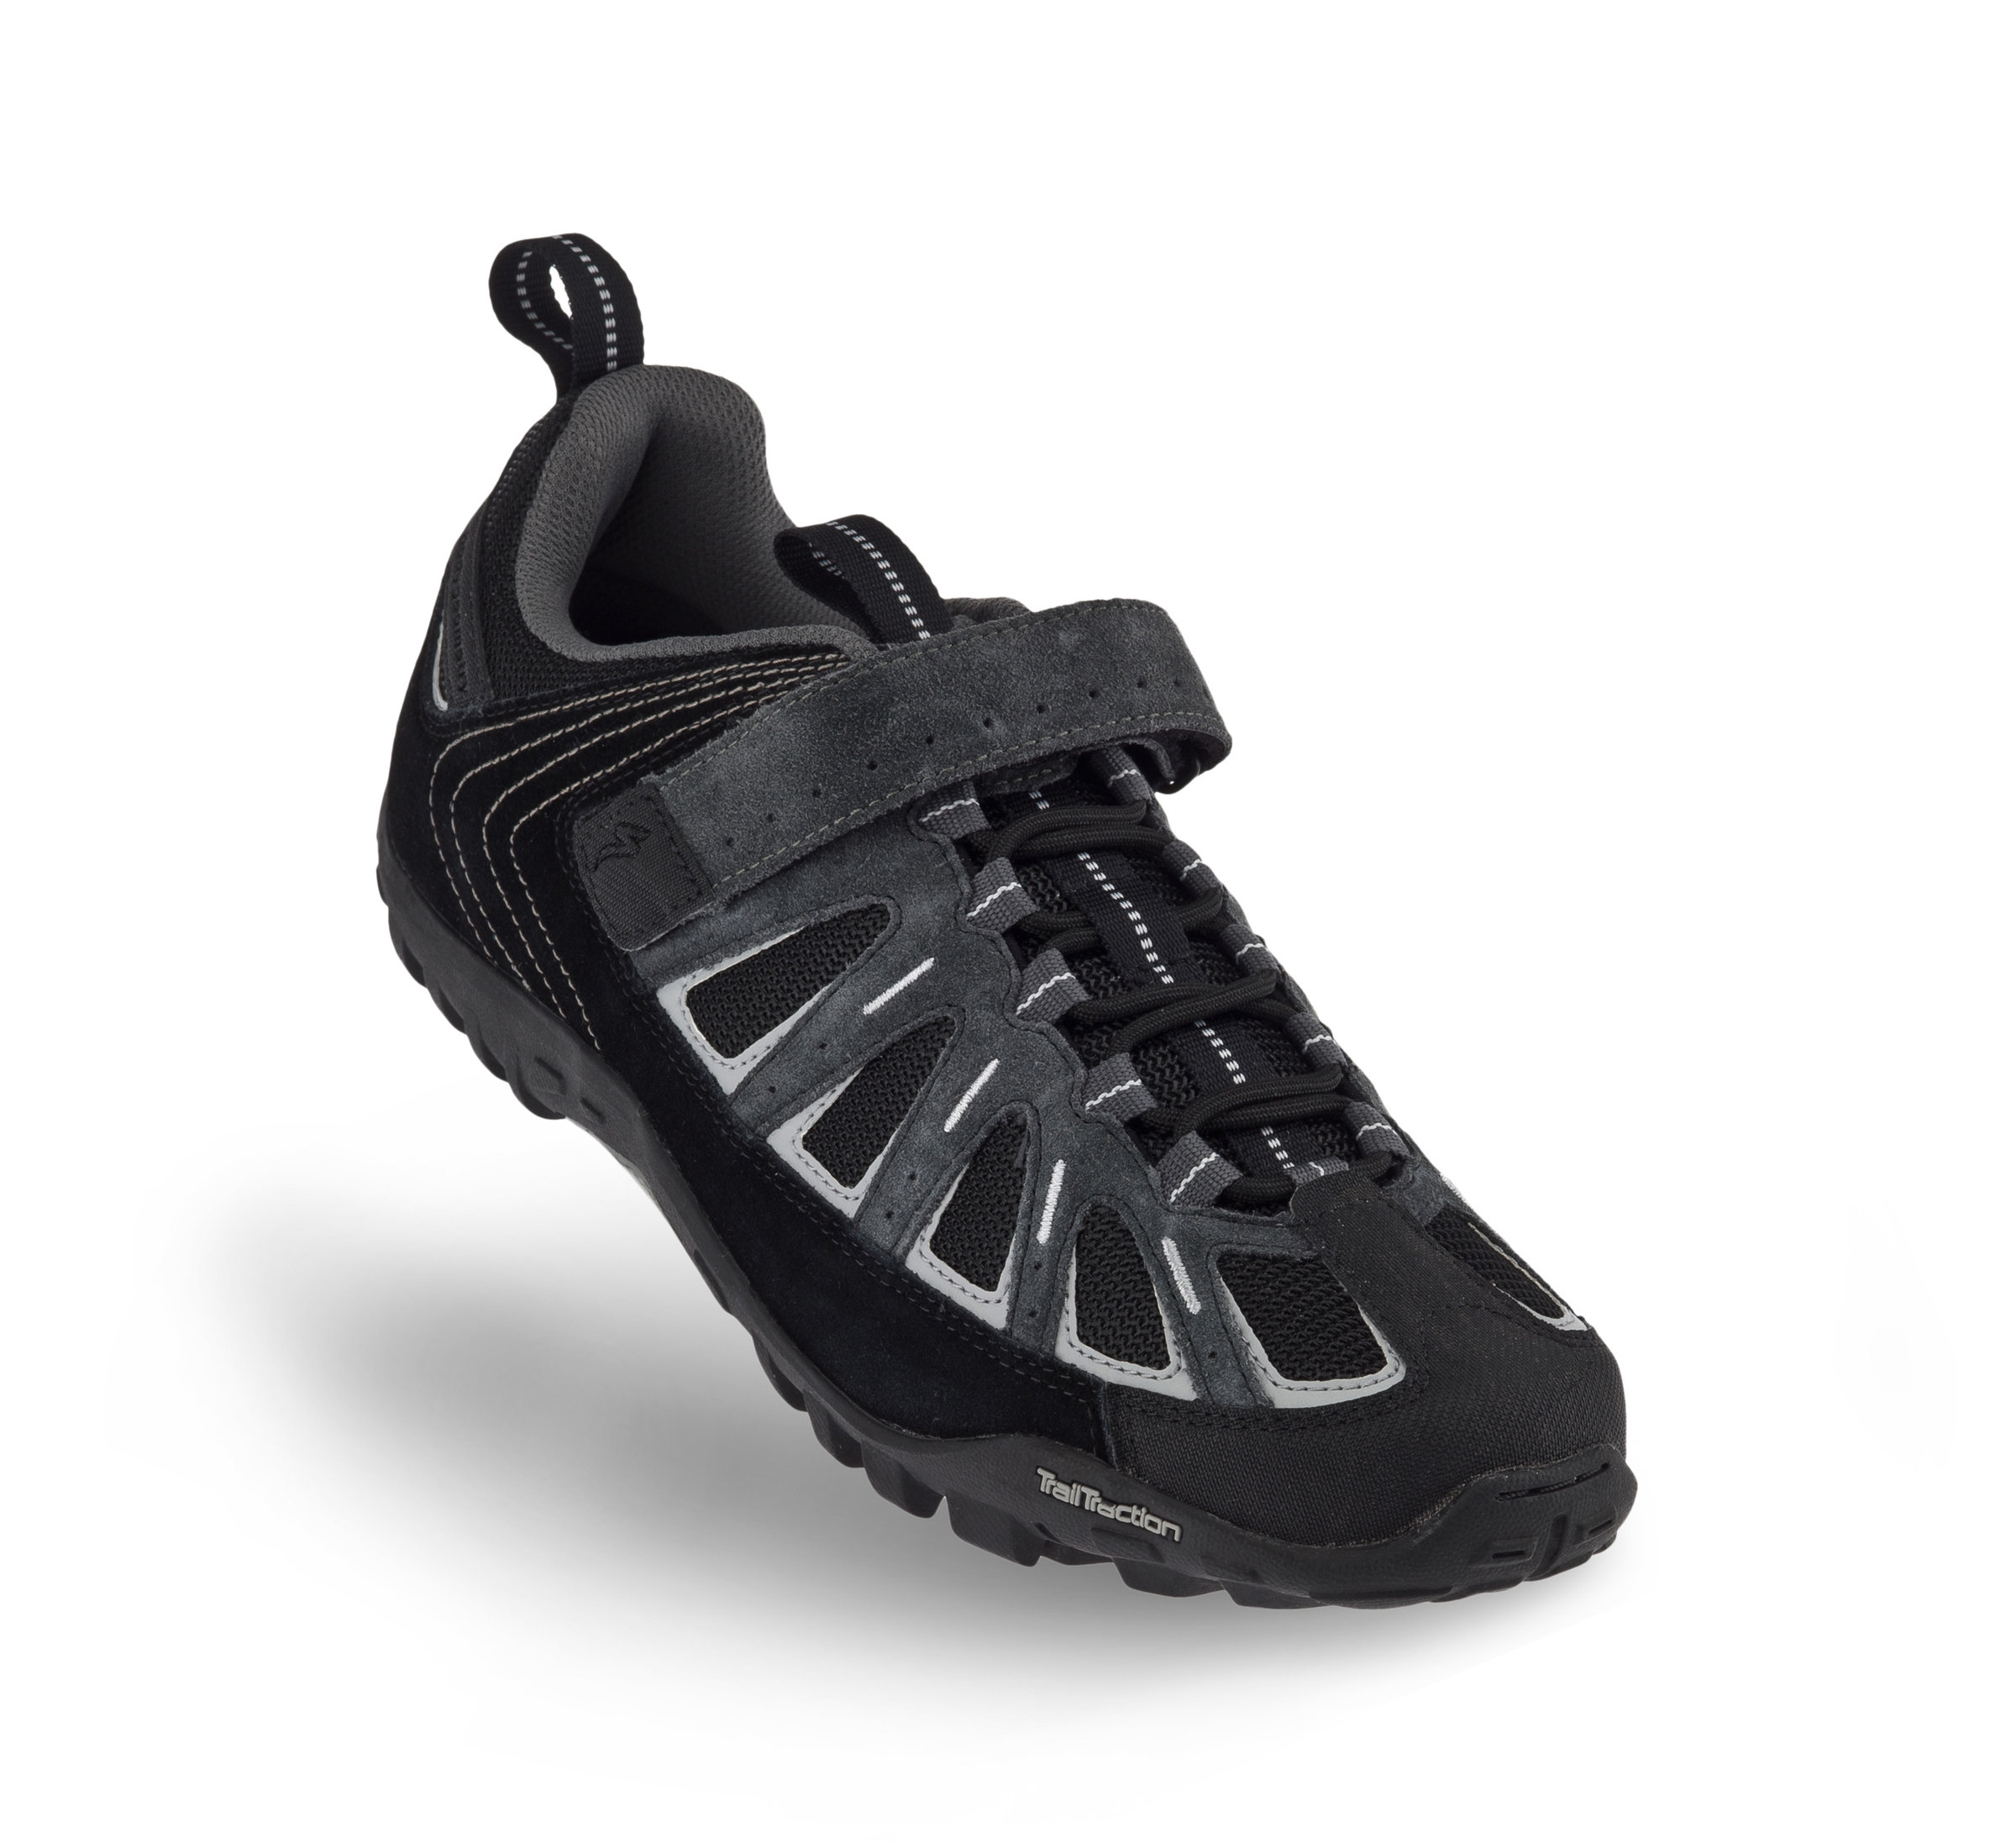 specialized tahoe mtb shoes